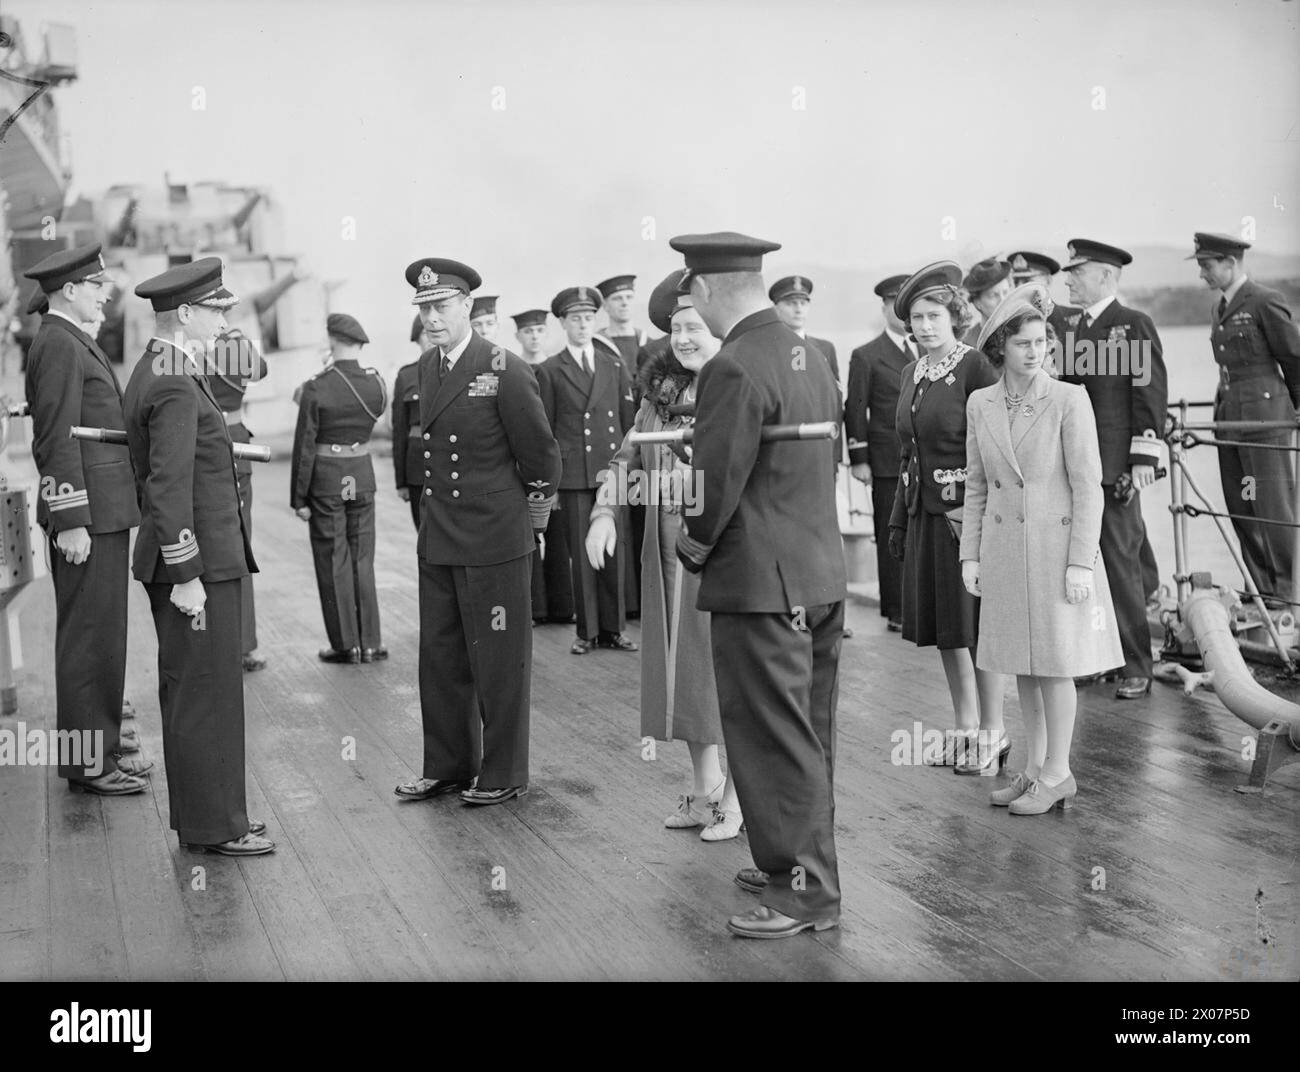 ROYAL VISIT TO HMS KING GEORGE V. 29 OCTOBER 1944, GREENOCK. THE KING AND QUEEN ACCOMPANIED BY PRINCESS ELIZABETH AND PRINCESS MARGARET PAID A FAREWELL VISIT TO THE BATTLESHIP HMS KING GEORGE V BEFORE SHE LEFT TO JOIN BRITAIN'S EAST INDIES FLEET. - The King and Queen with Princess Elizabeth and Princess Margaret on the quarterdeck of KING GEORGE V soon after their arrival Stock Photo